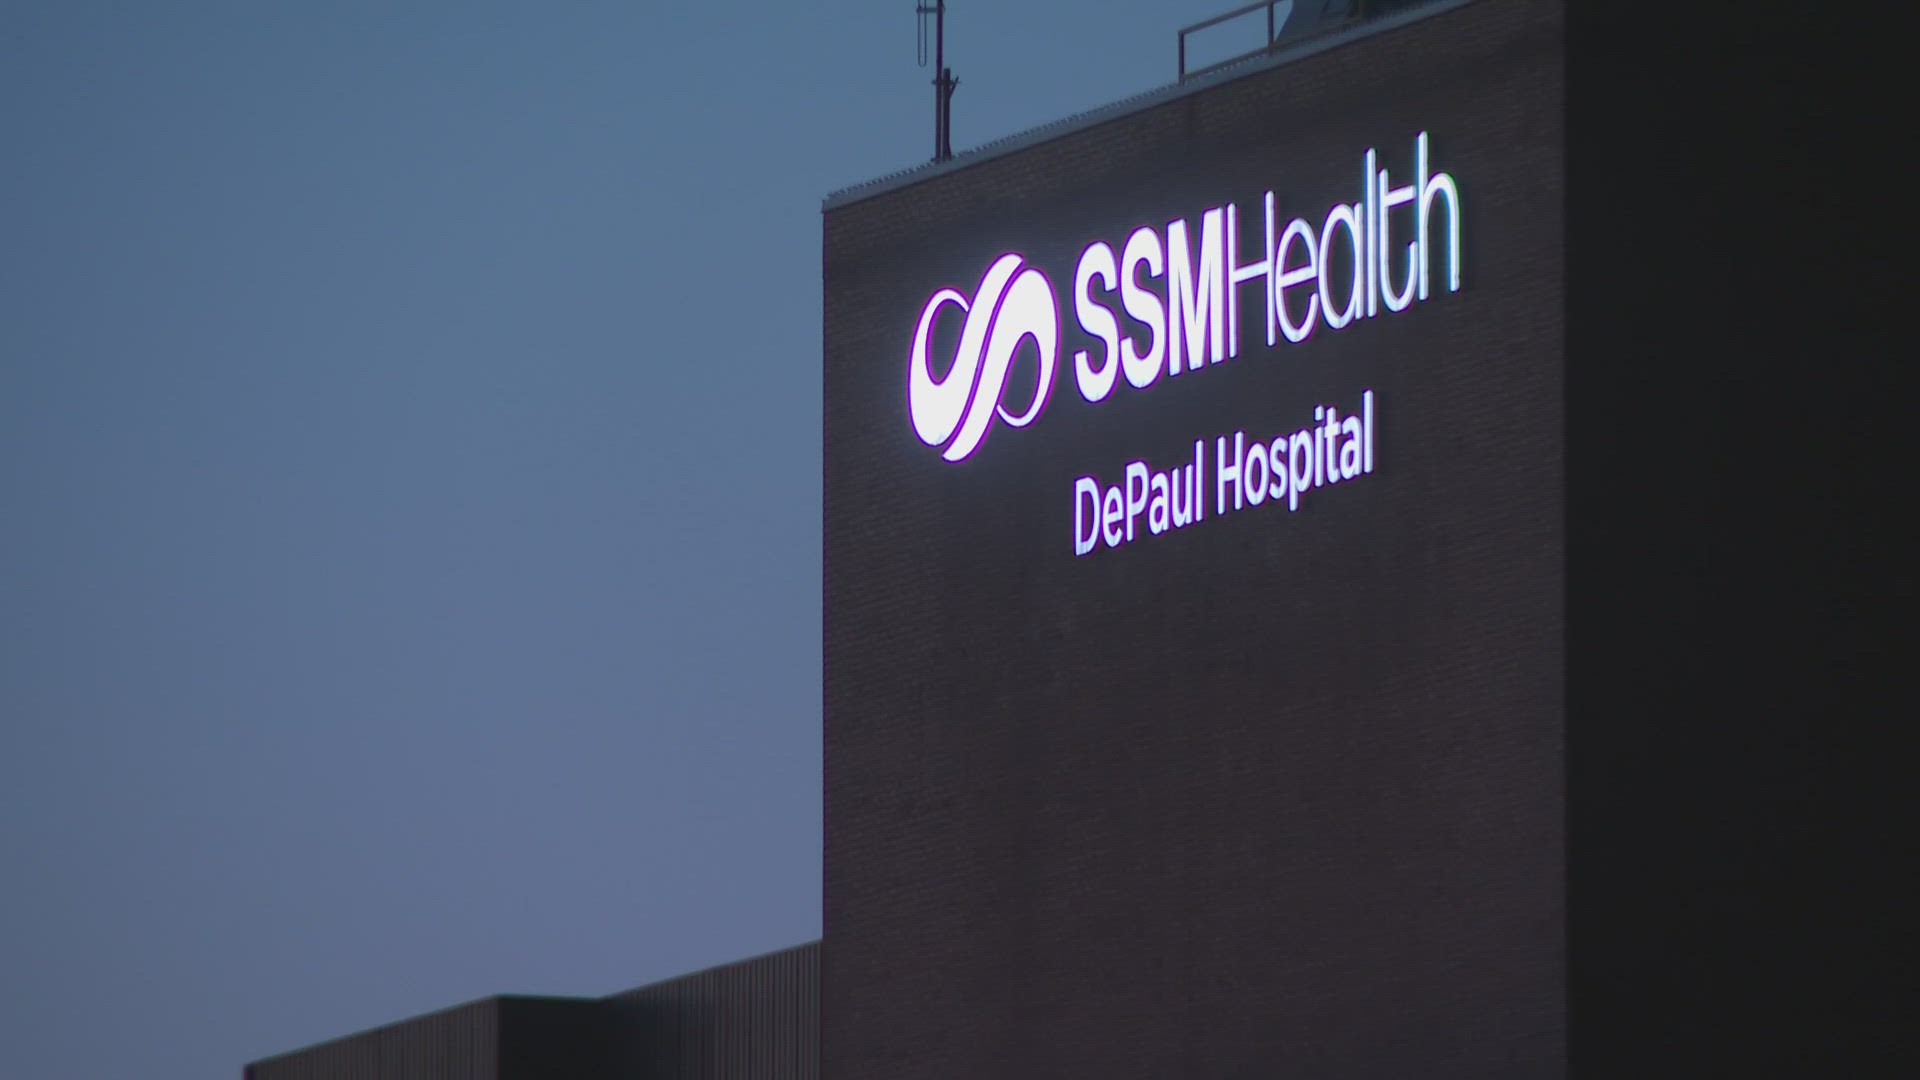 Ambulances were temporarily diverted from SSM Health DePaul Hospital after a water main break on the hospital's campus. Water was restored early Tuesday morning.